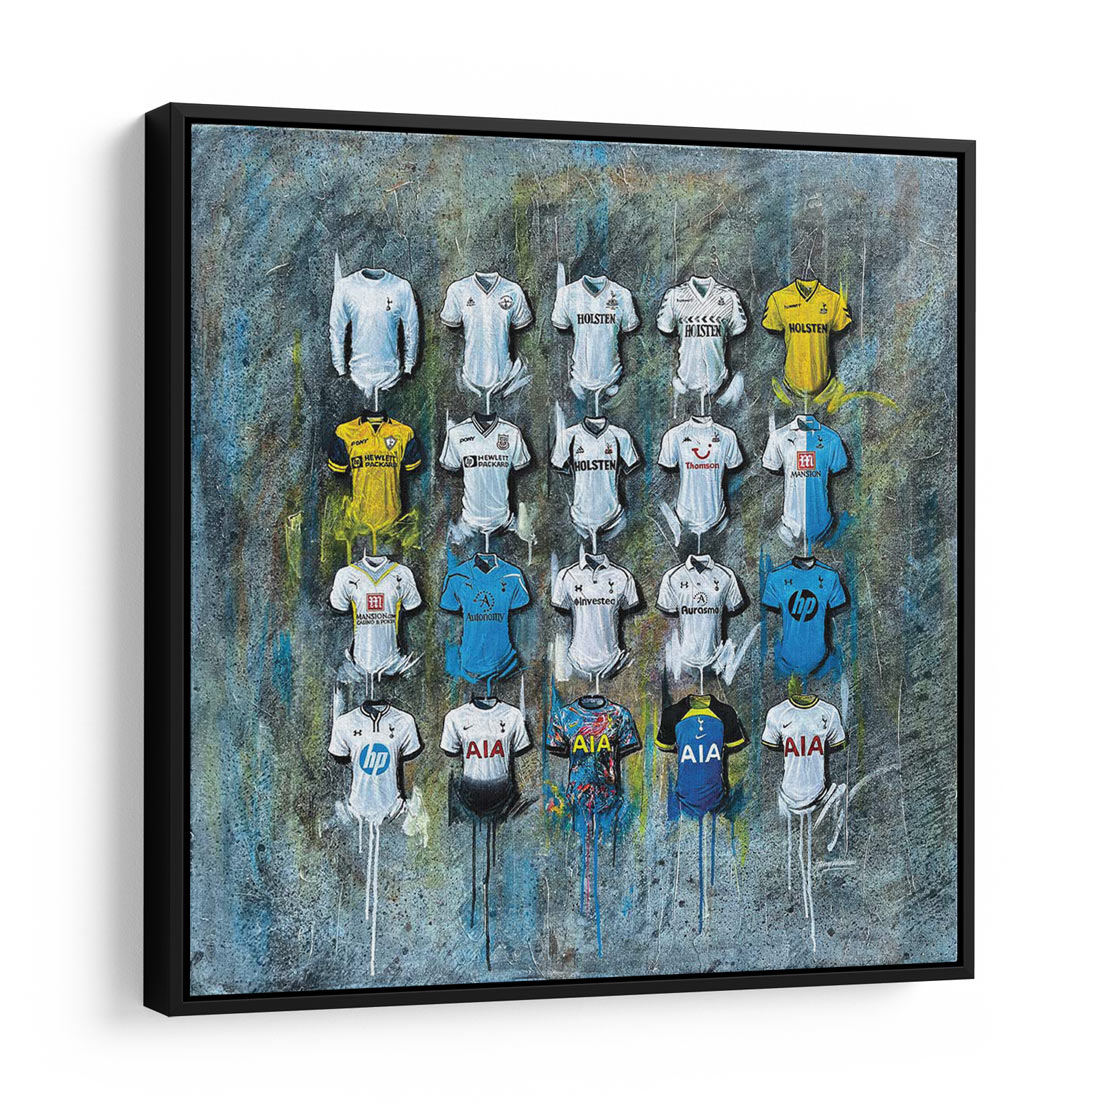 These canvases from Terry Kneeshaw are perfect for Spurs fans! Featuring the team's iconic crest and players, these artworks are available in various sizes including 20x20, 30x30, and 40x40, with options for framed or unframed black floating frames. The Tottenham Hotspur 2022 canvases are perfect for the new season and will bring joy to any Spurs supporter. Get your hands on one today!